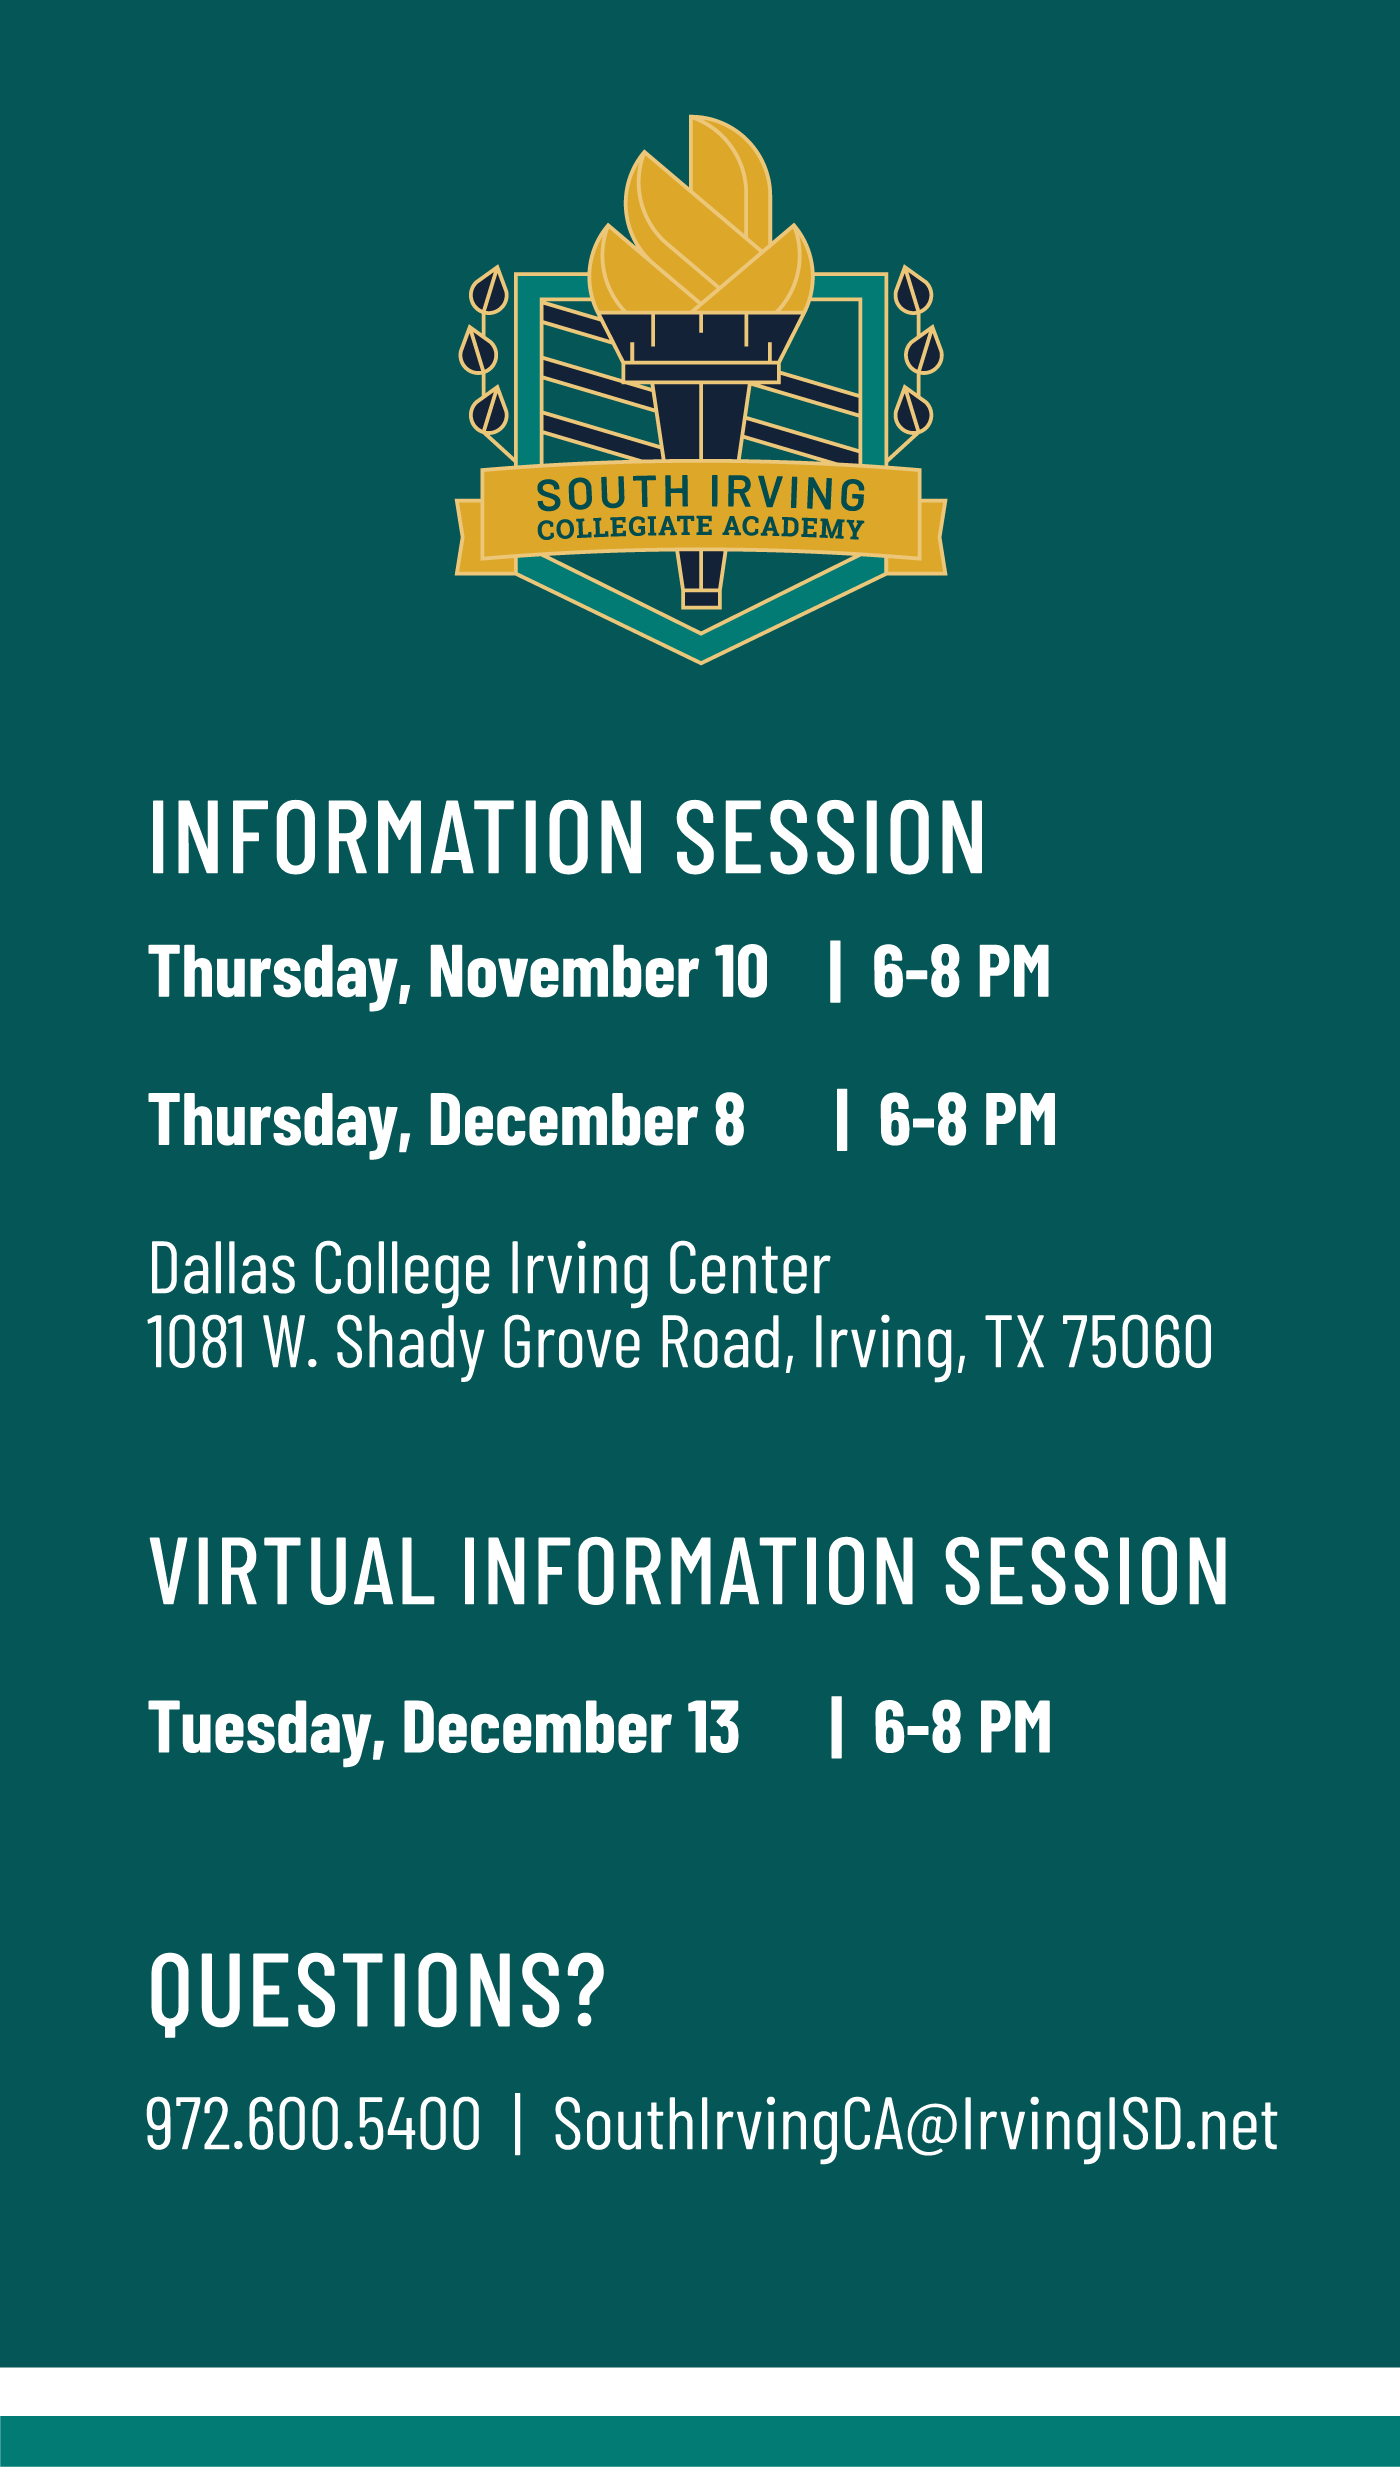 South Irving Collegiate Academy Information Sessions